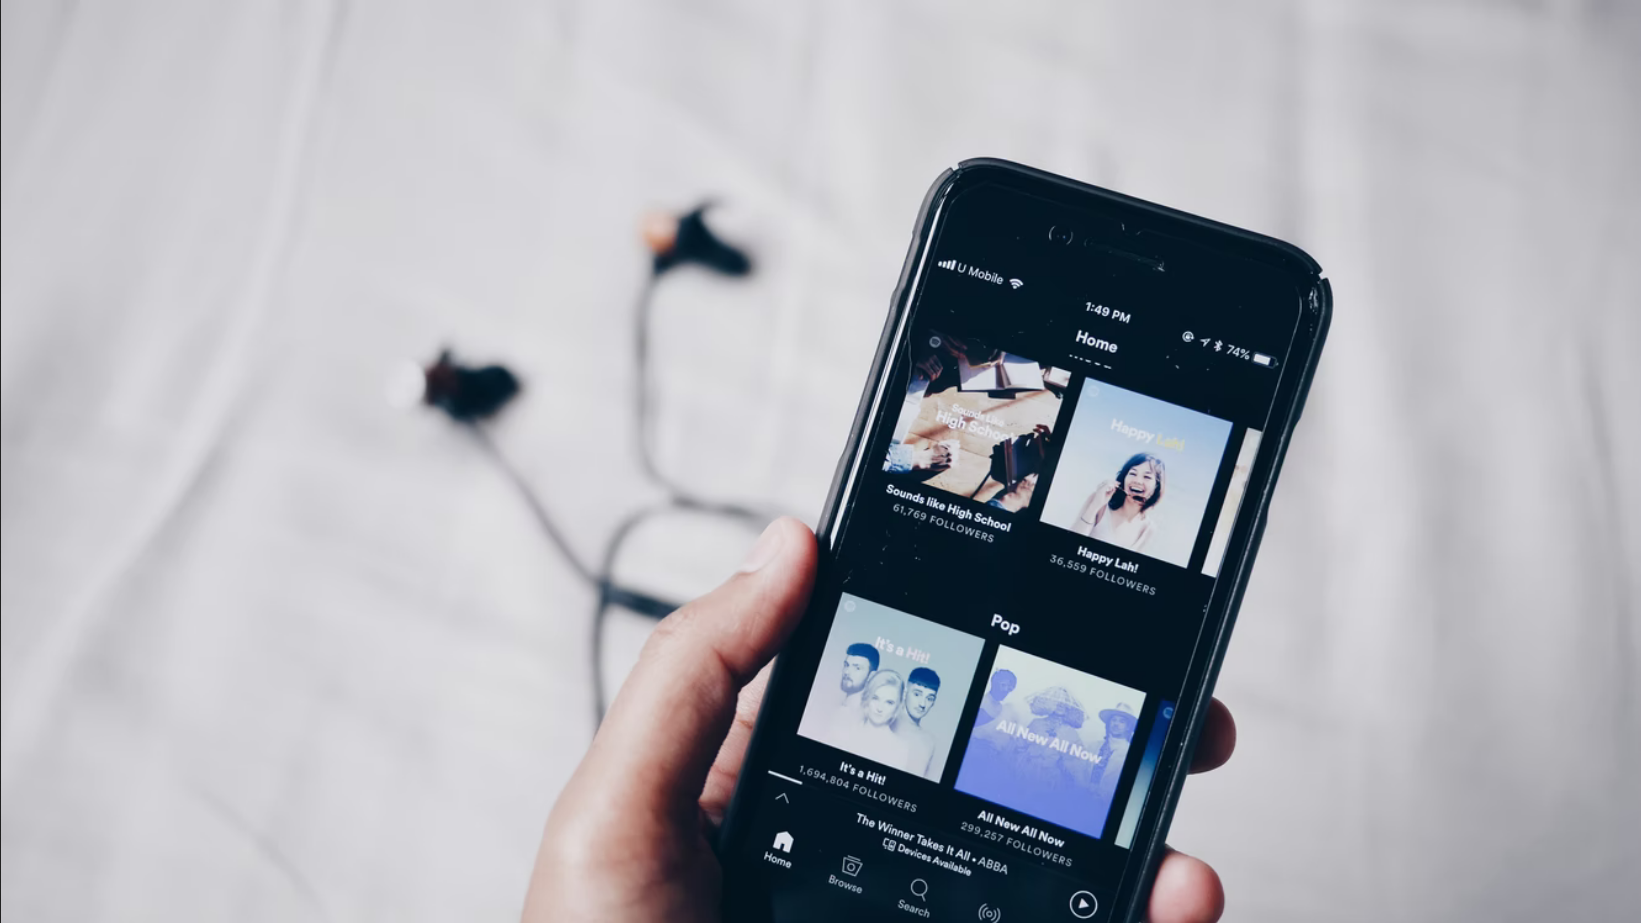 How to see your Spotify history